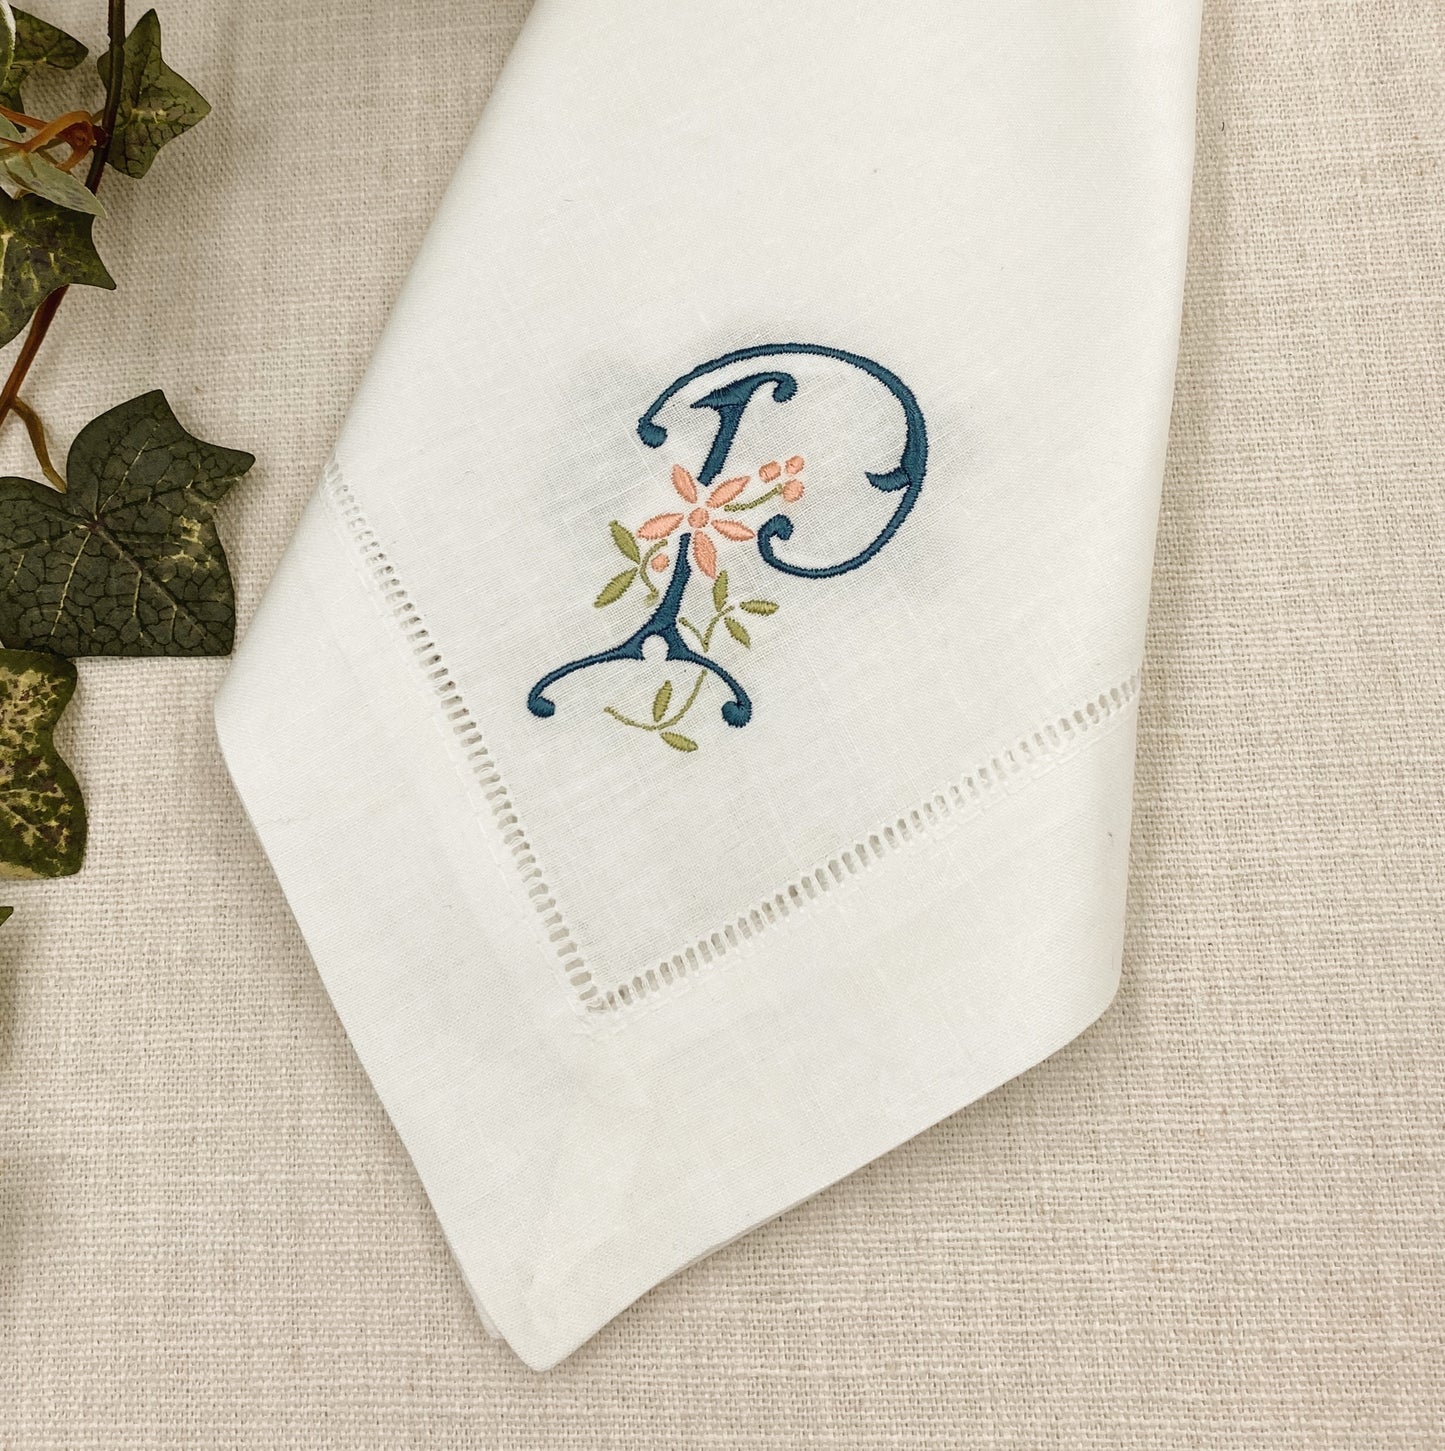 Linen dinner napkin monogrammed with font and floral accents